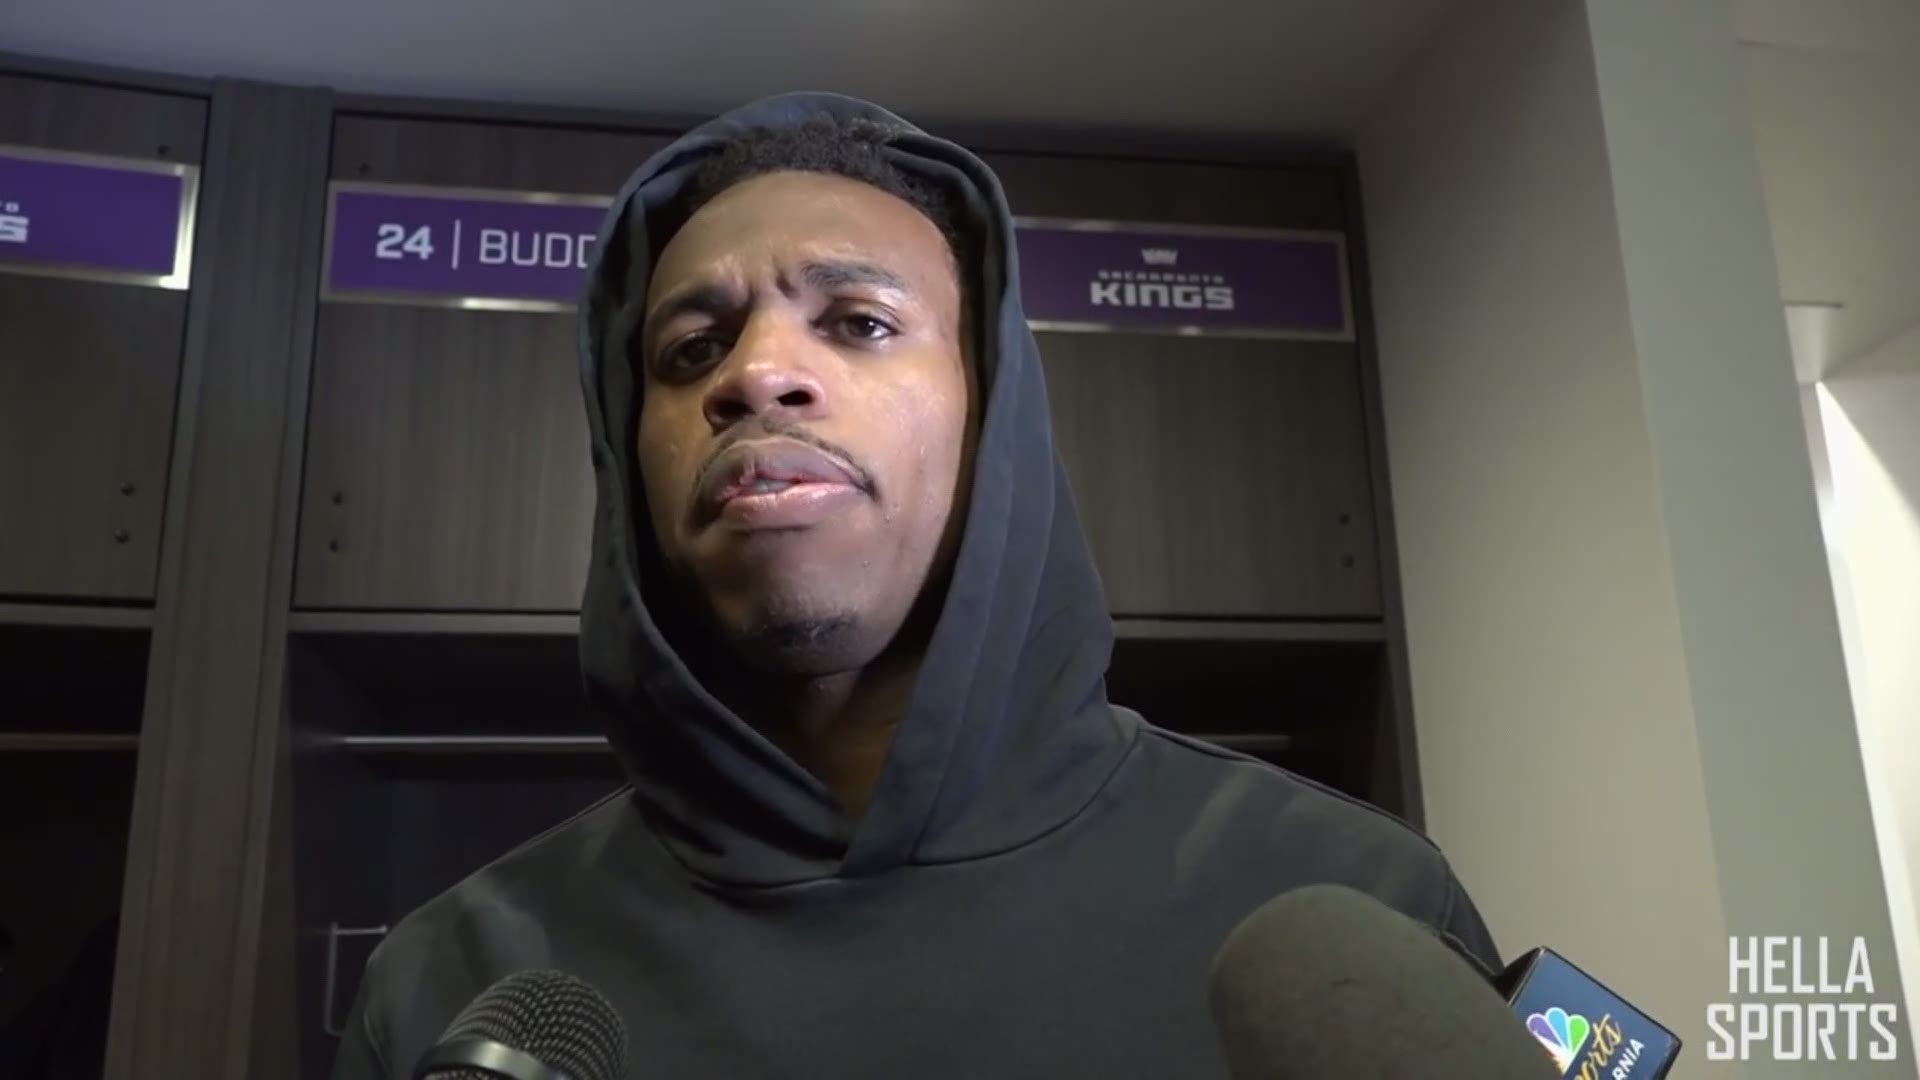 Kings SG Buddy Hield talks about the love Sacramento fans showed he checked into the game as the new three-point champion & Sacramento's win over Memphis Grizzlies.